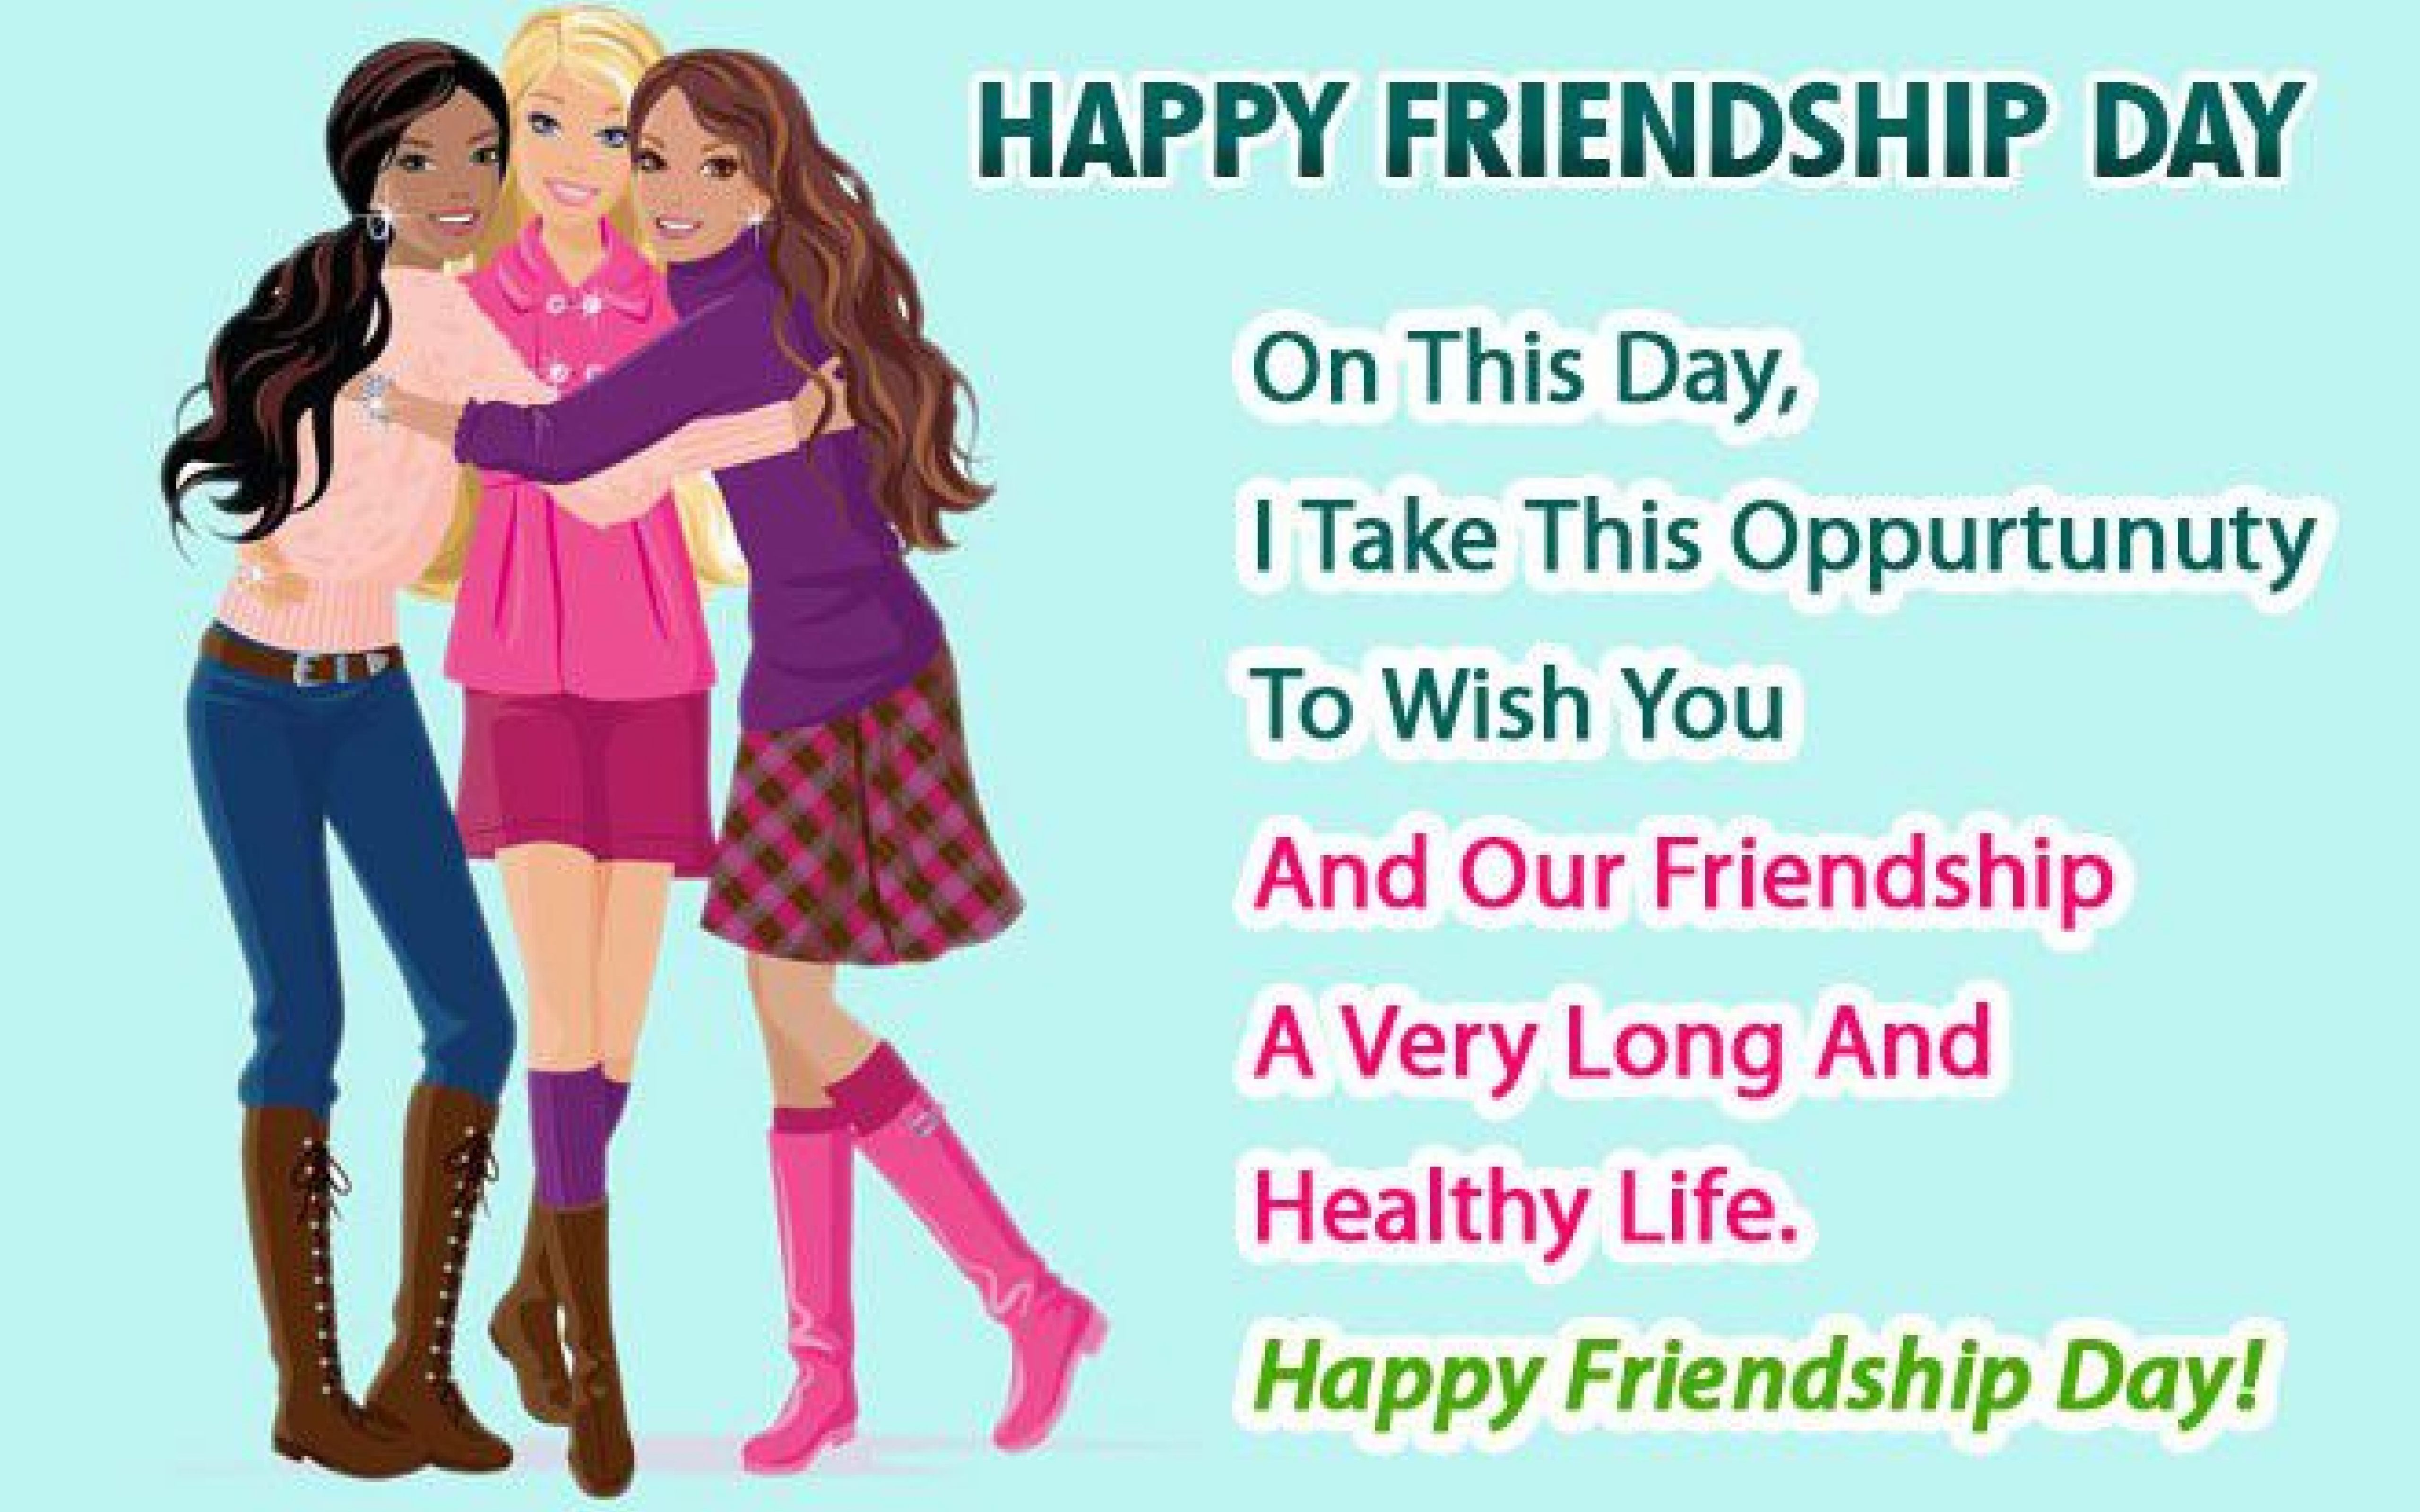 Happy Friendship Day Wallpaper For PC Mobile iPhone Happy. Happy